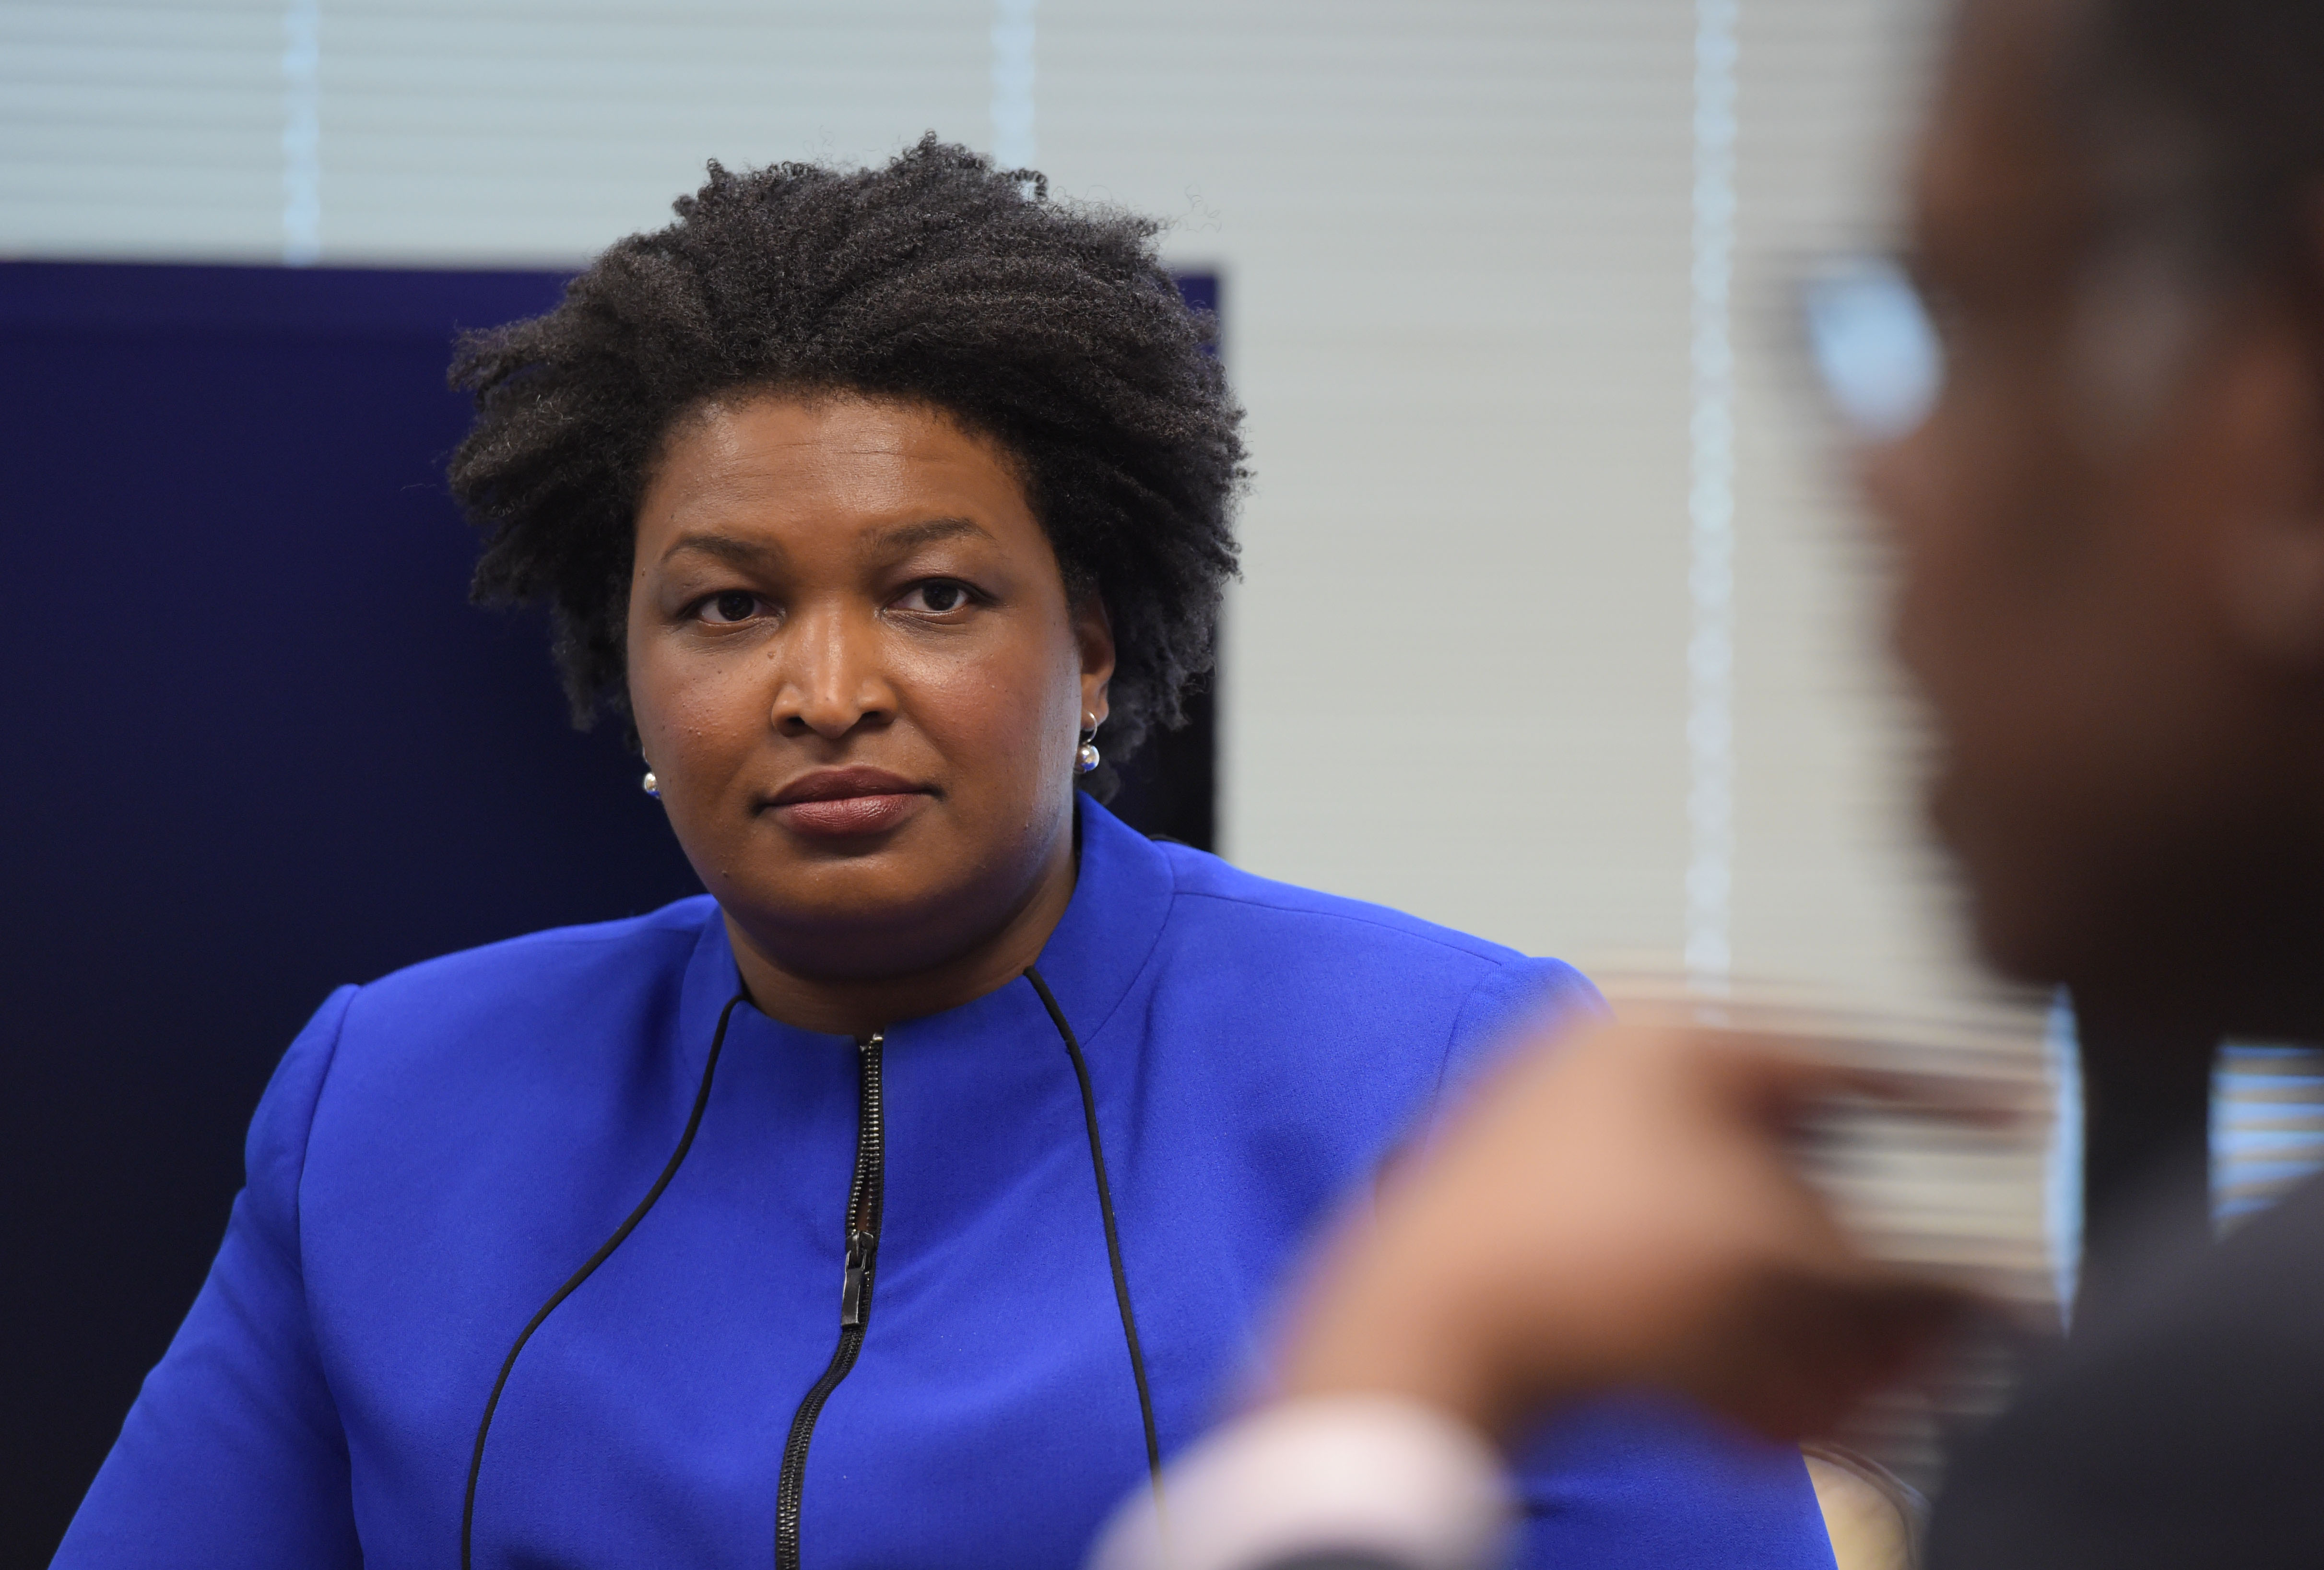 Reading other people’s mail: Stacey Abrams resigns as House leader